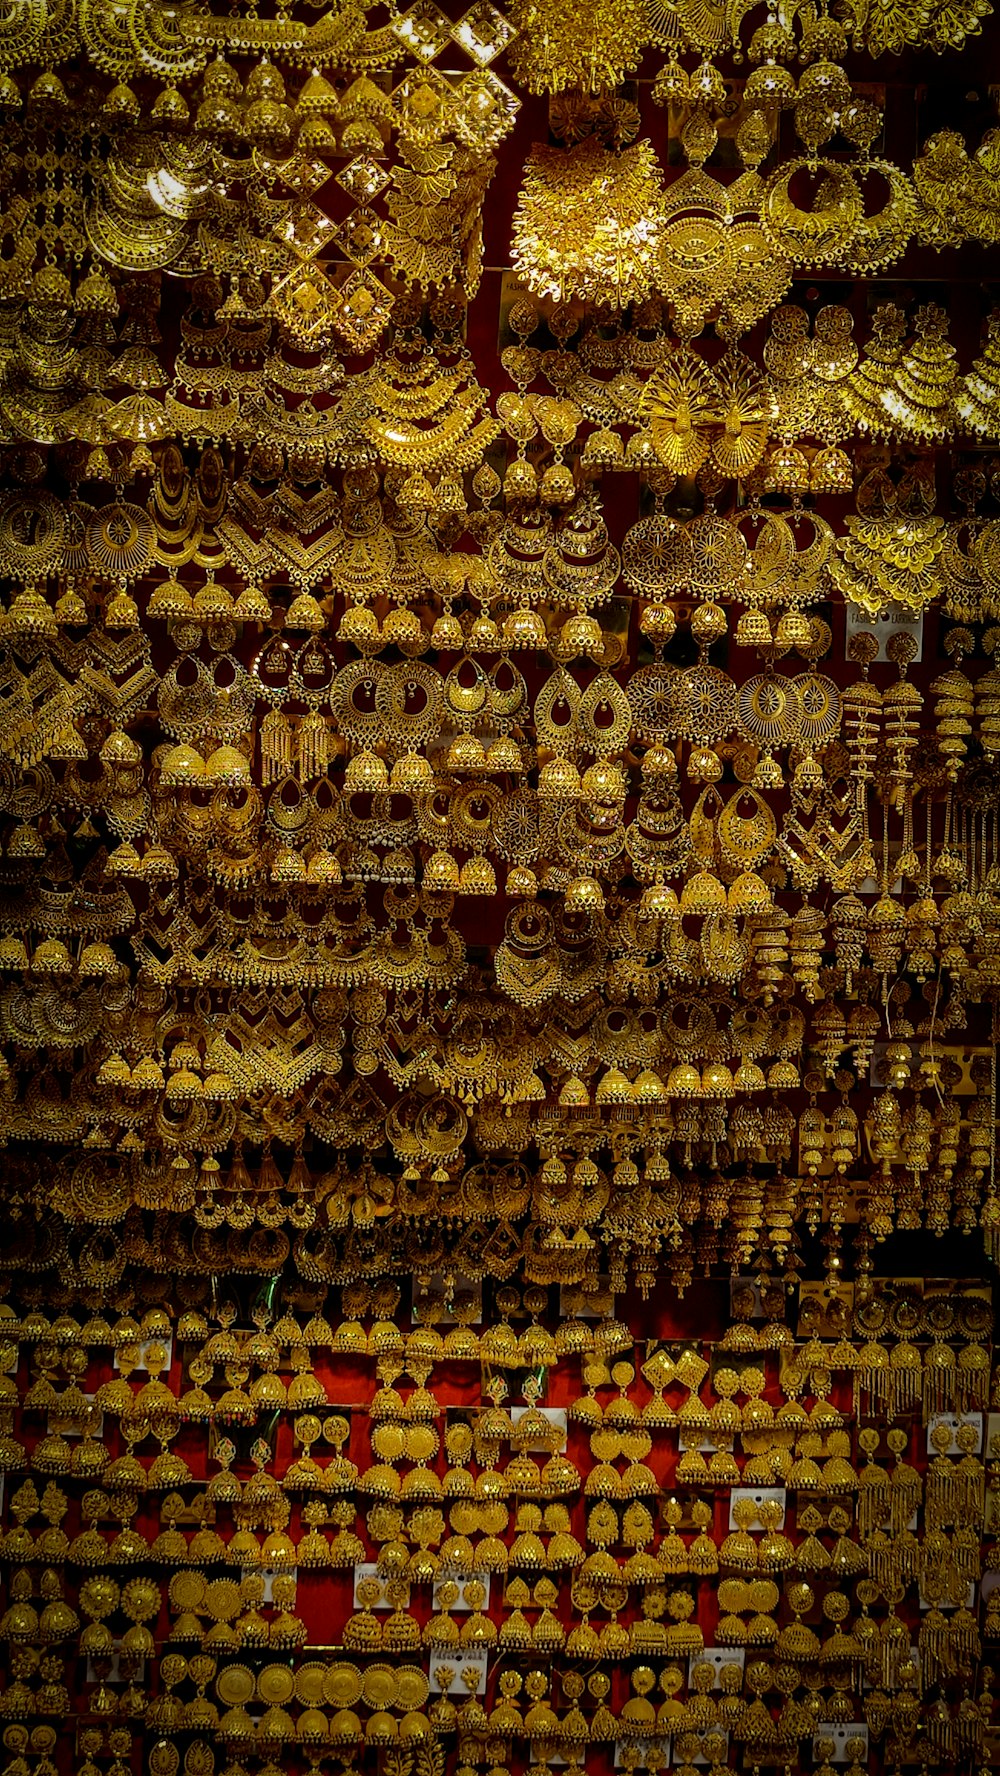 a wall covered in lots of gold jewelry